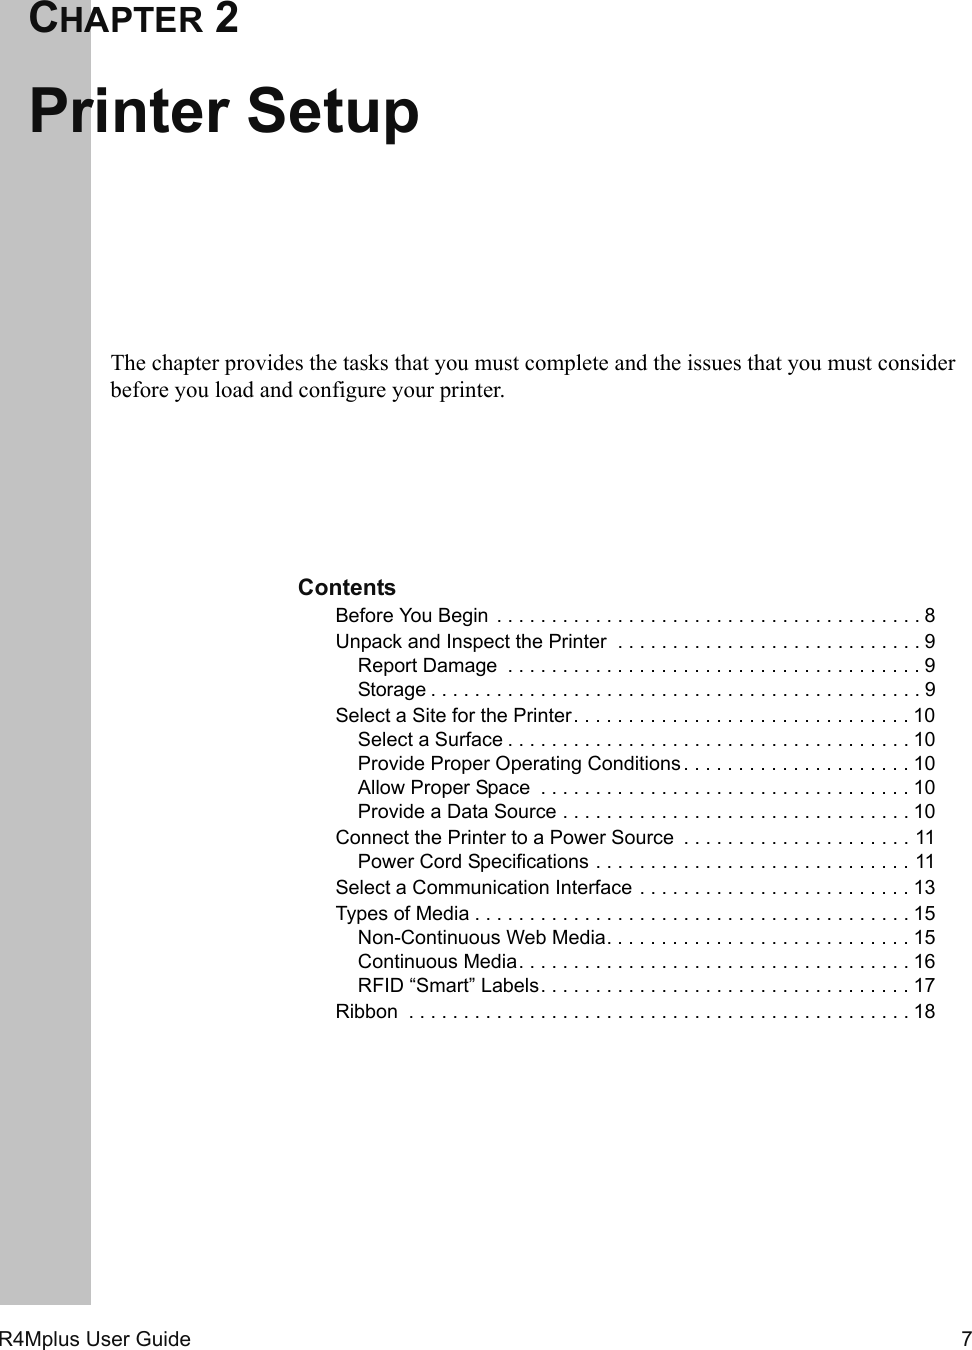 R4Mplus User Guide  7CHAPTER 2Printer SetupThe chapter provides the tasks that you must complete and the issues that you must consider before you load and configure your printer.ContentsBefore You Begin  . . . . . . . . . . . . . . . . . . . . . . . . . . . . . . . . . . . . . . . 8Unpack and Inspect the Printer  . . . . . . . . . . . . . . . . . . . . . . . . . . . . 9Report Damage  . . . . . . . . . . . . . . . . . . . . . . . . . . . . . . . . . . . . . . 9Storage . . . . . . . . . . . . . . . . . . . . . . . . . . . . . . . . . . . . . . . . . . . . . 9Select a Site for the Printer. . . . . . . . . . . . . . . . . . . . . . . . . . . . . . . 10Select a Surface . . . . . . . . . . . . . . . . . . . . . . . . . . . . . . . . . . . . . 10Provide Proper Operating Conditions. . . . . . . . . . . . . . . . . . . . . 10Allow Proper Space  . . . . . . . . . . . . . . . . . . . . . . . . . . . . . . . . . . 10Provide a Data Source . . . . . . . . . . . . . . . . . . . . . . . . . . . . . . . . 10Connect the Printer to a Power Source  . . . . . . . . . . . . . . . . . . . . . 11Power Cord Specifications . . . . . . . . . . . . . . . . . . . . . . . . . . . . . 11Select a Communication Interface . . . . . . . . . . . . . . . . . . . . . . . . . 13Types of Media . . . . . . . . . . . . . . . . . . . . . . . . . . . . . . . . . . . . . . . . 15Non-Continuous Web Media. . . . . . . . . . . . . . . . . . . . . . . . . . . . 15Continuous Media. . . . . . . . . . . . . . . . . . . . . . . . . . . . . . . . . . . . 16RFID “Smart” Labels. . . . . . . . . . . . . . . . . . . . . . . . . . . . . . . . . . 17Ribbon  . . . . . . . . . . . . . . . . . . . . . . . . . . . . . . . . . . . . . . . . . . . . . . 18